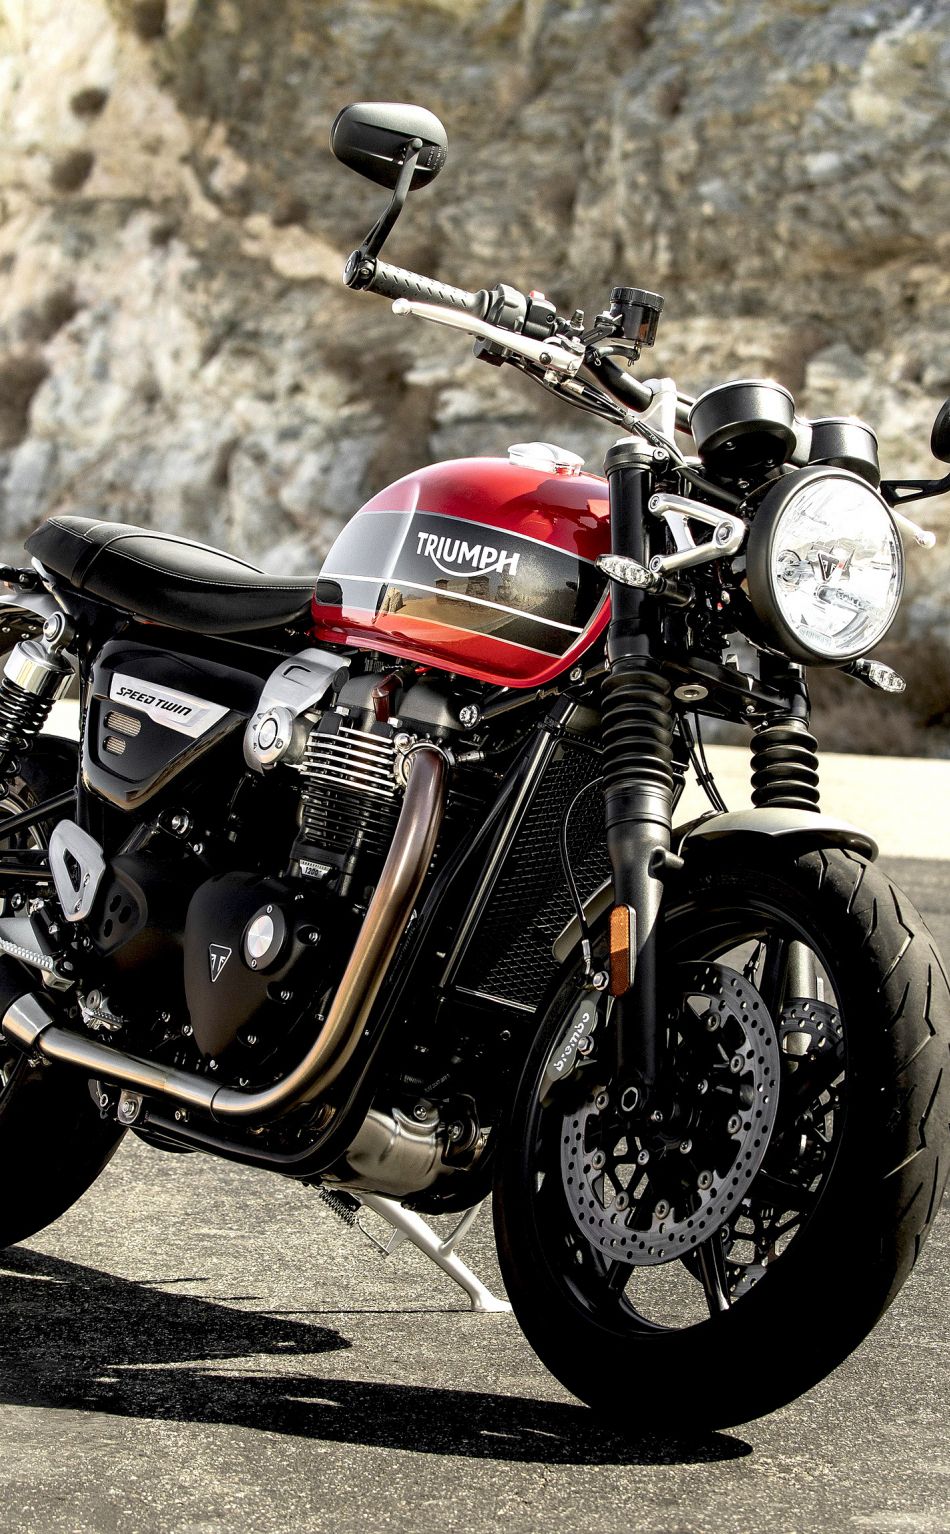 Download 950x1534 wallpaper triumph speed twin, motorcycle, iphone, 950x1534 HD image, background, 21031